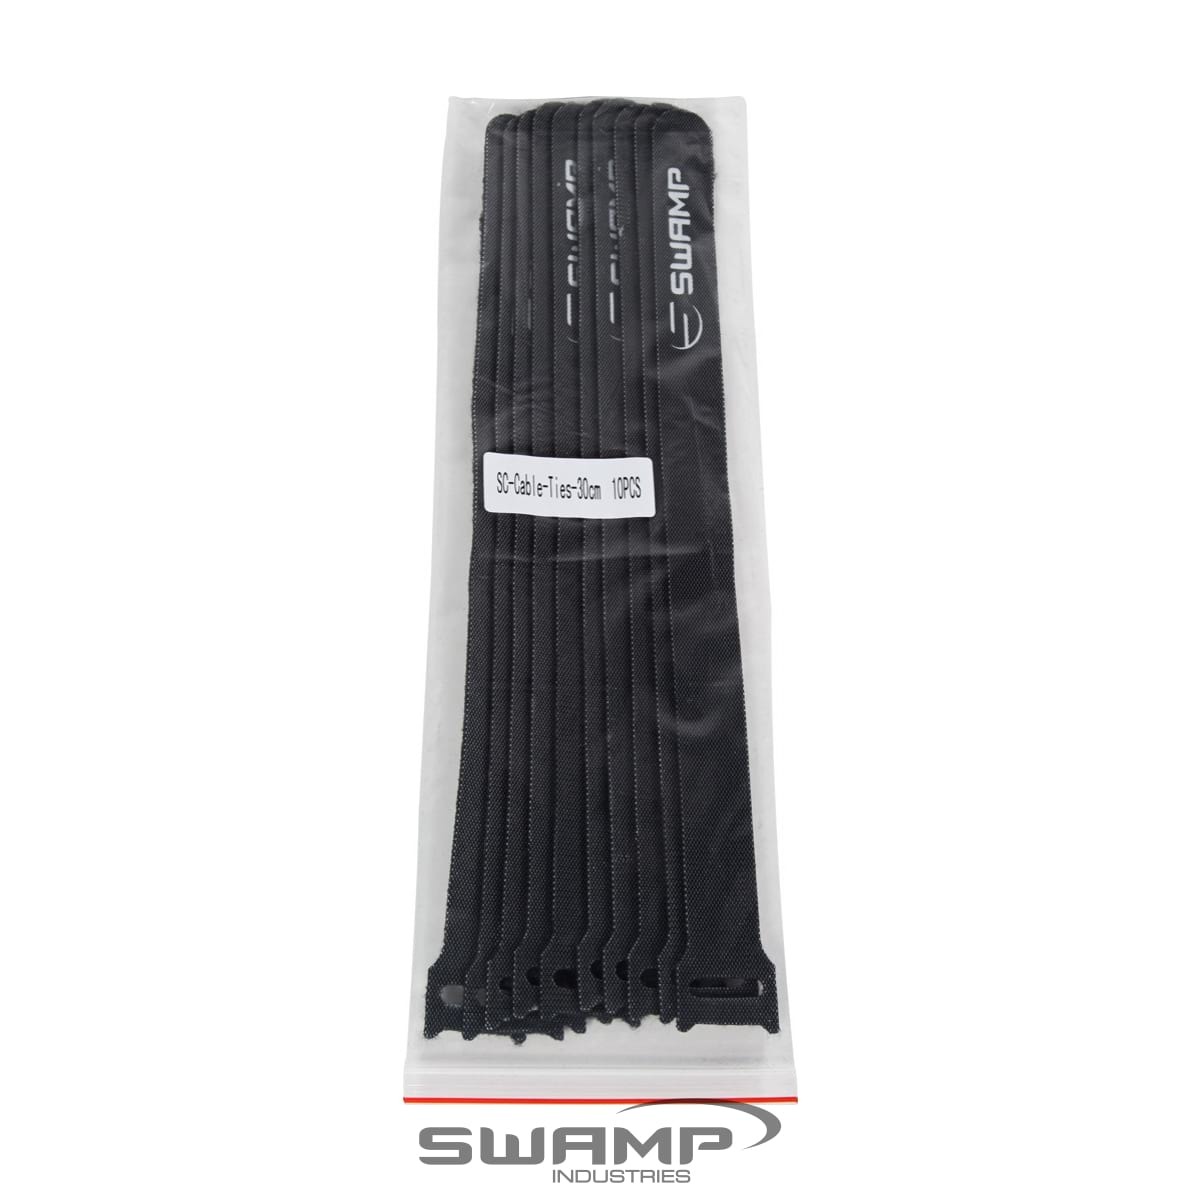 SWAMP Hook and Loop Cable Tie Roll 50m Black Reusable Double Sided